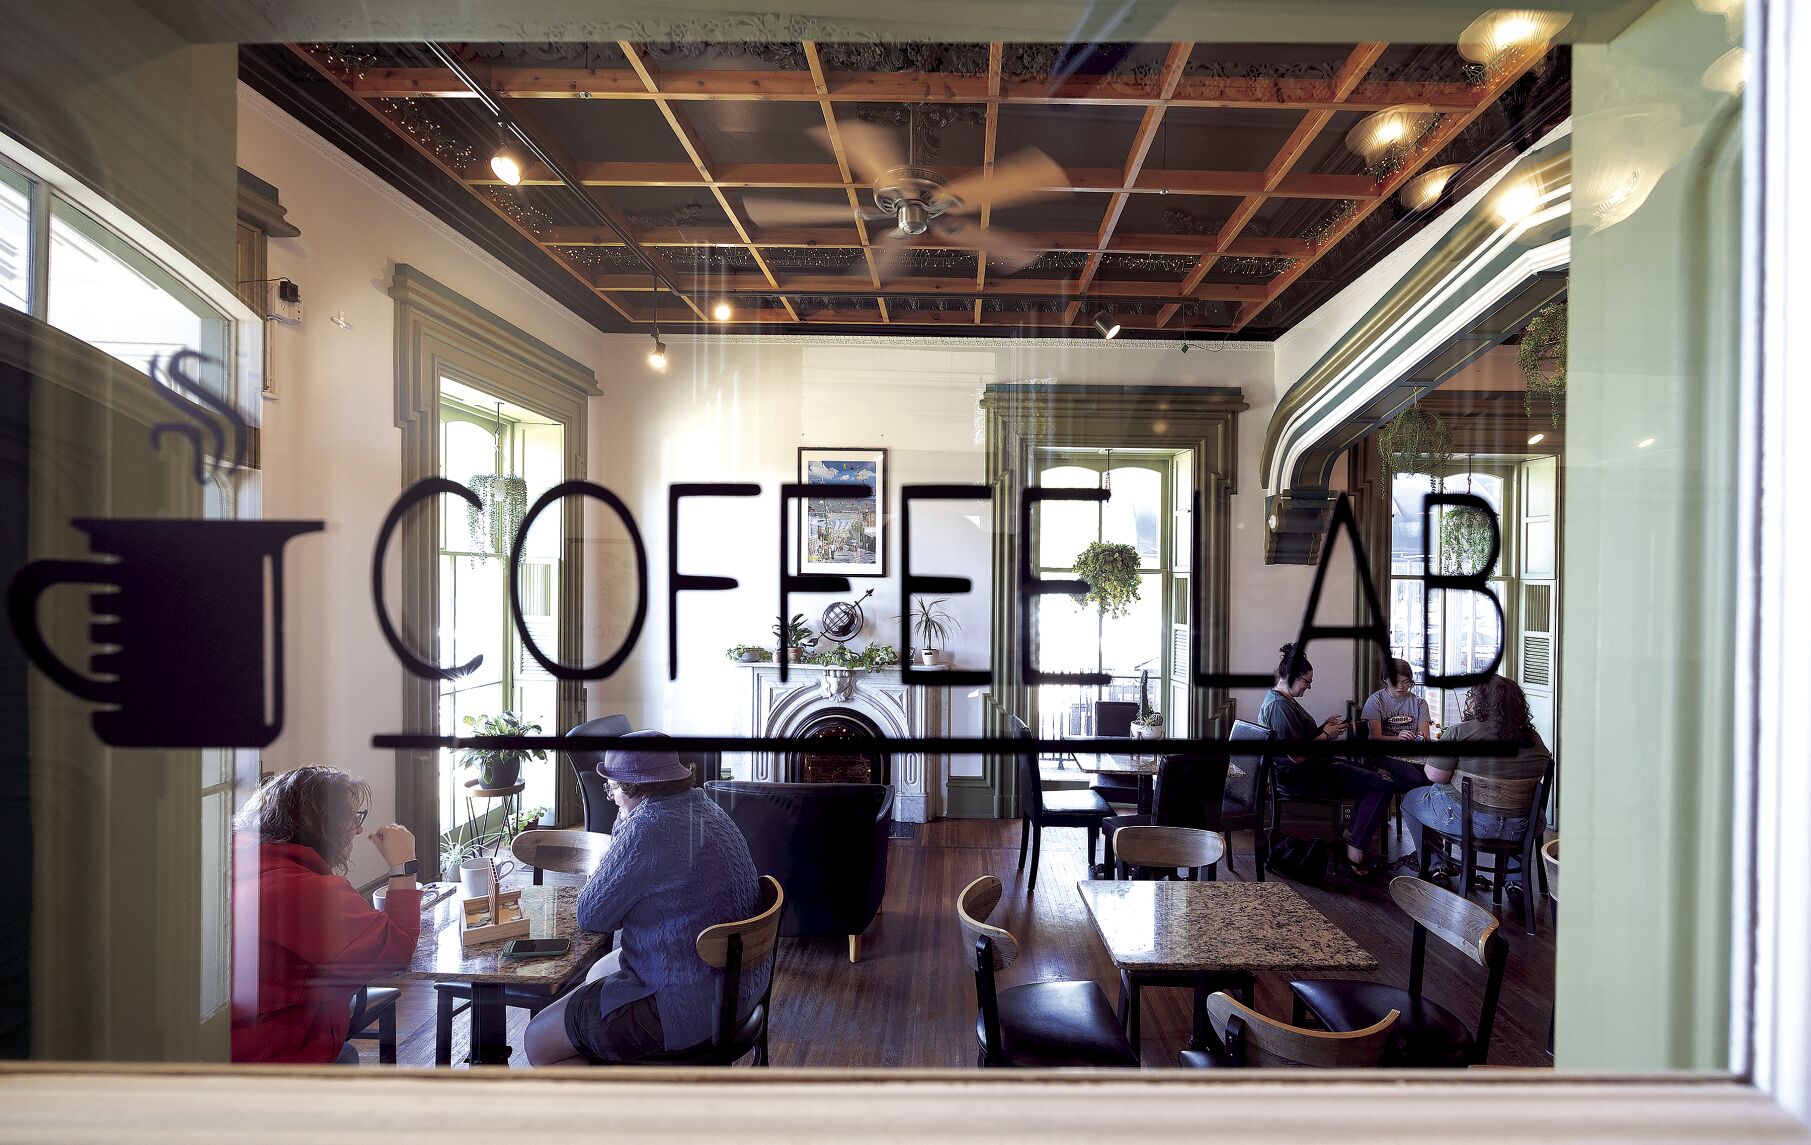 Coffee Lab is located at 2728 Asbury Road in Dubuque.    PHOTO CREDIT: Stephen Gassman